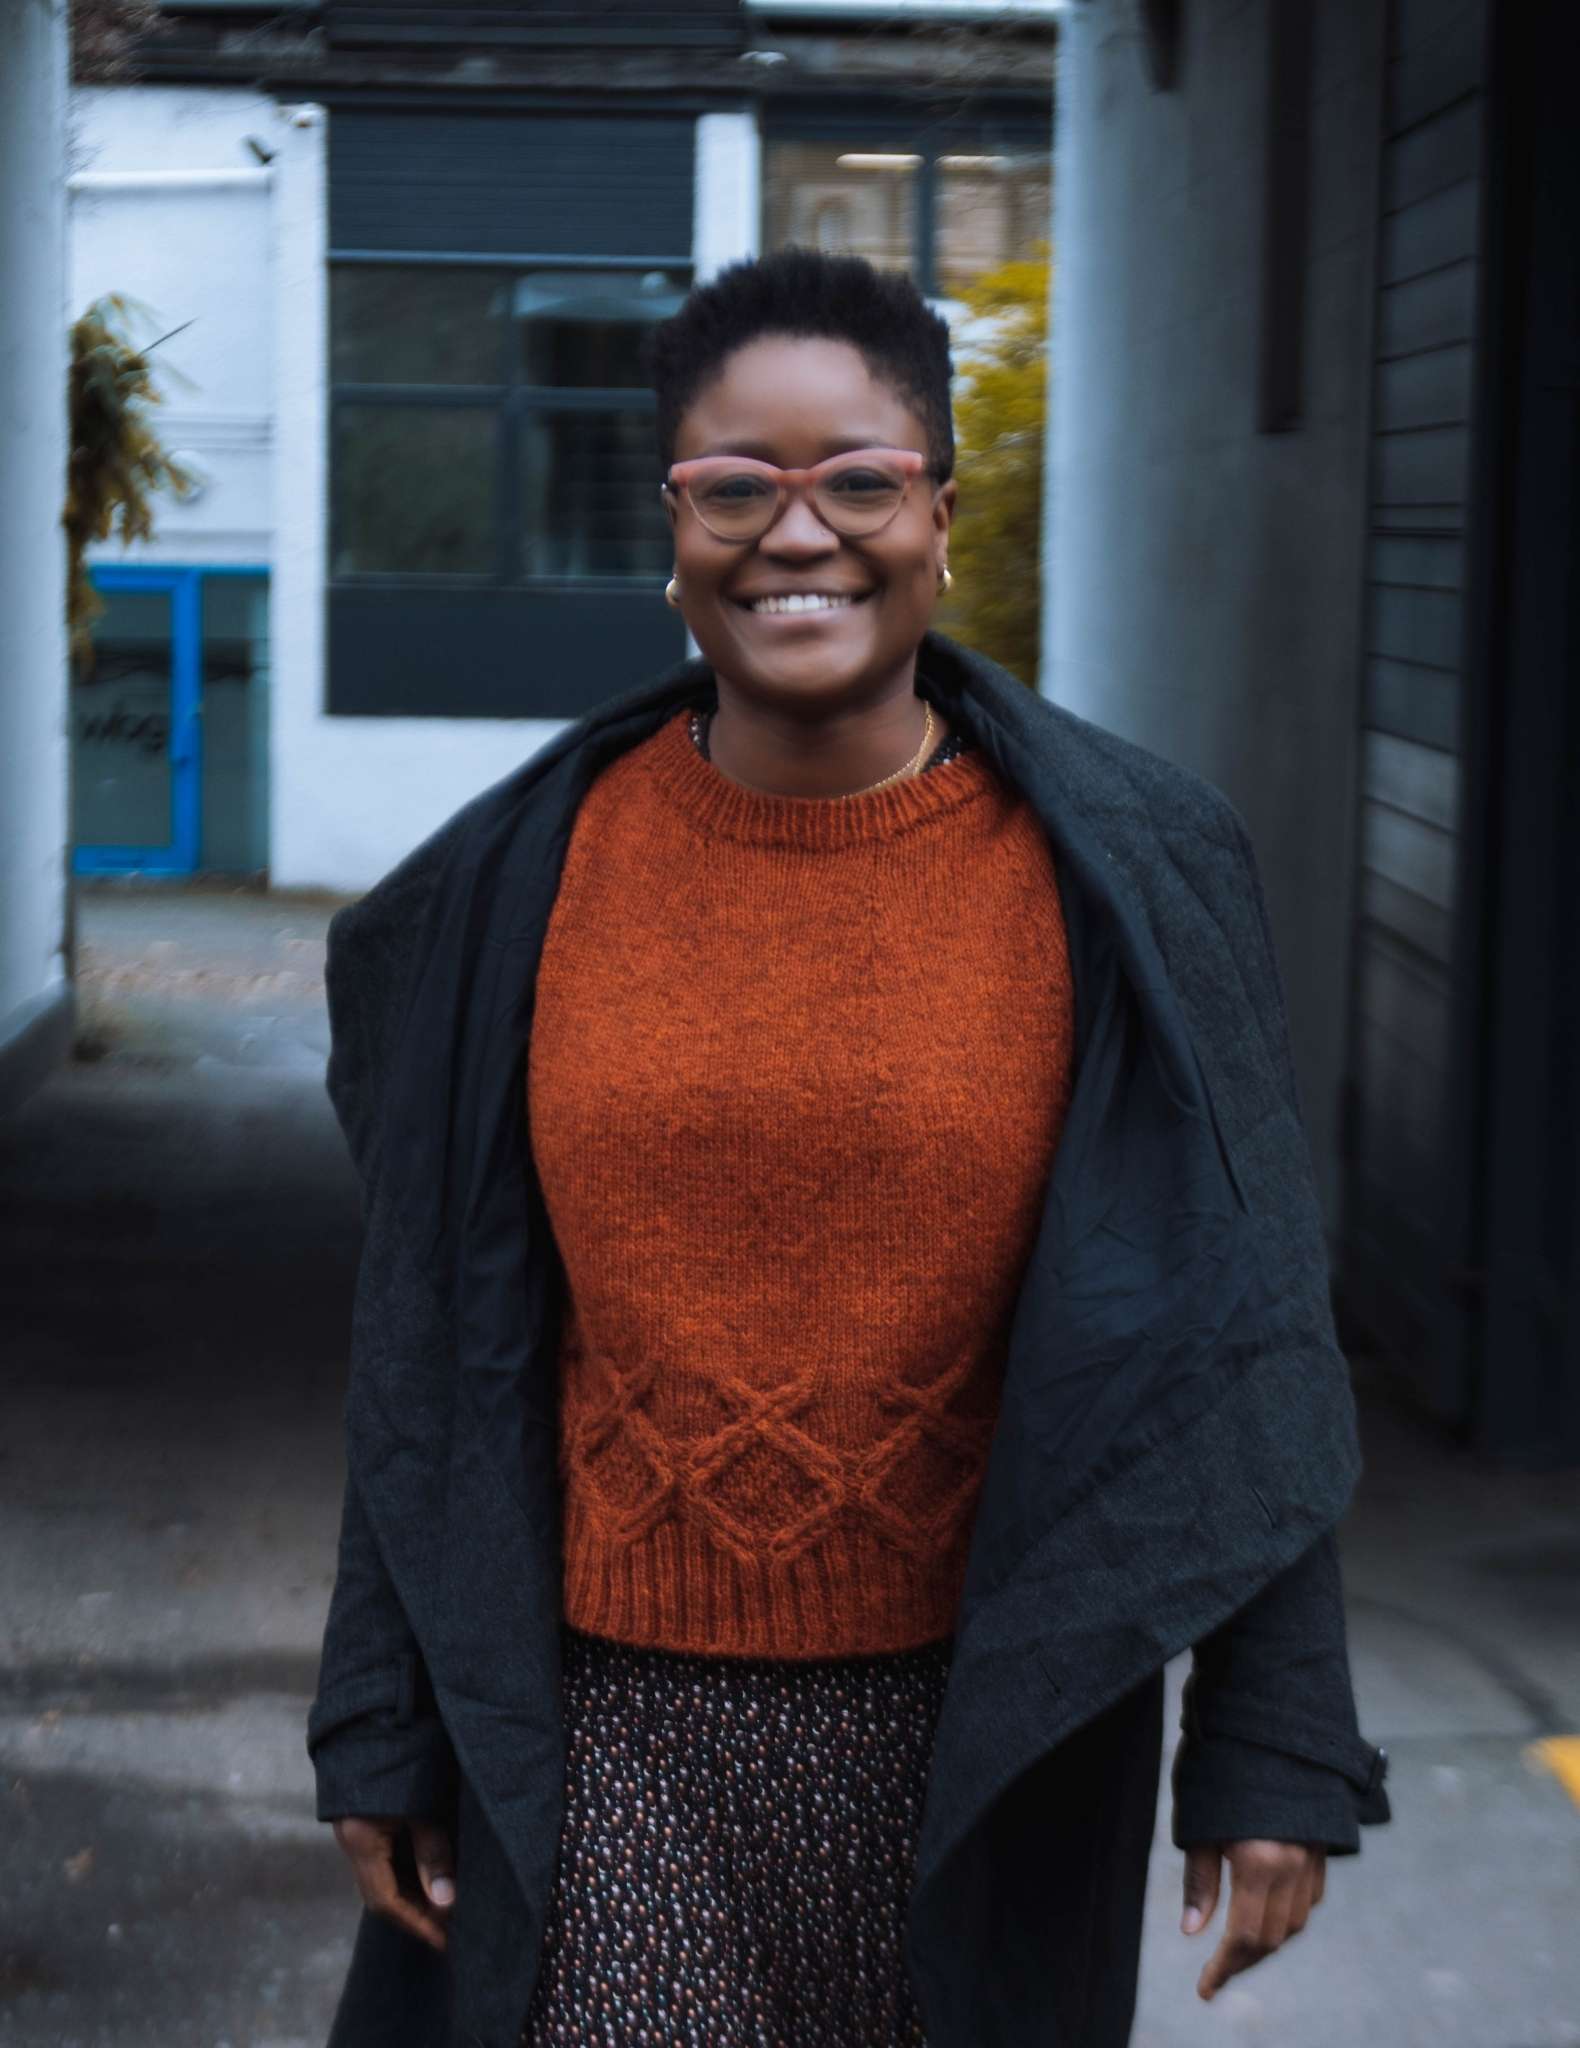 A black woman with short hair walks towards the camera wearing an orange cabled sweater, patterned skirt and a long dark jacket that hangs open.